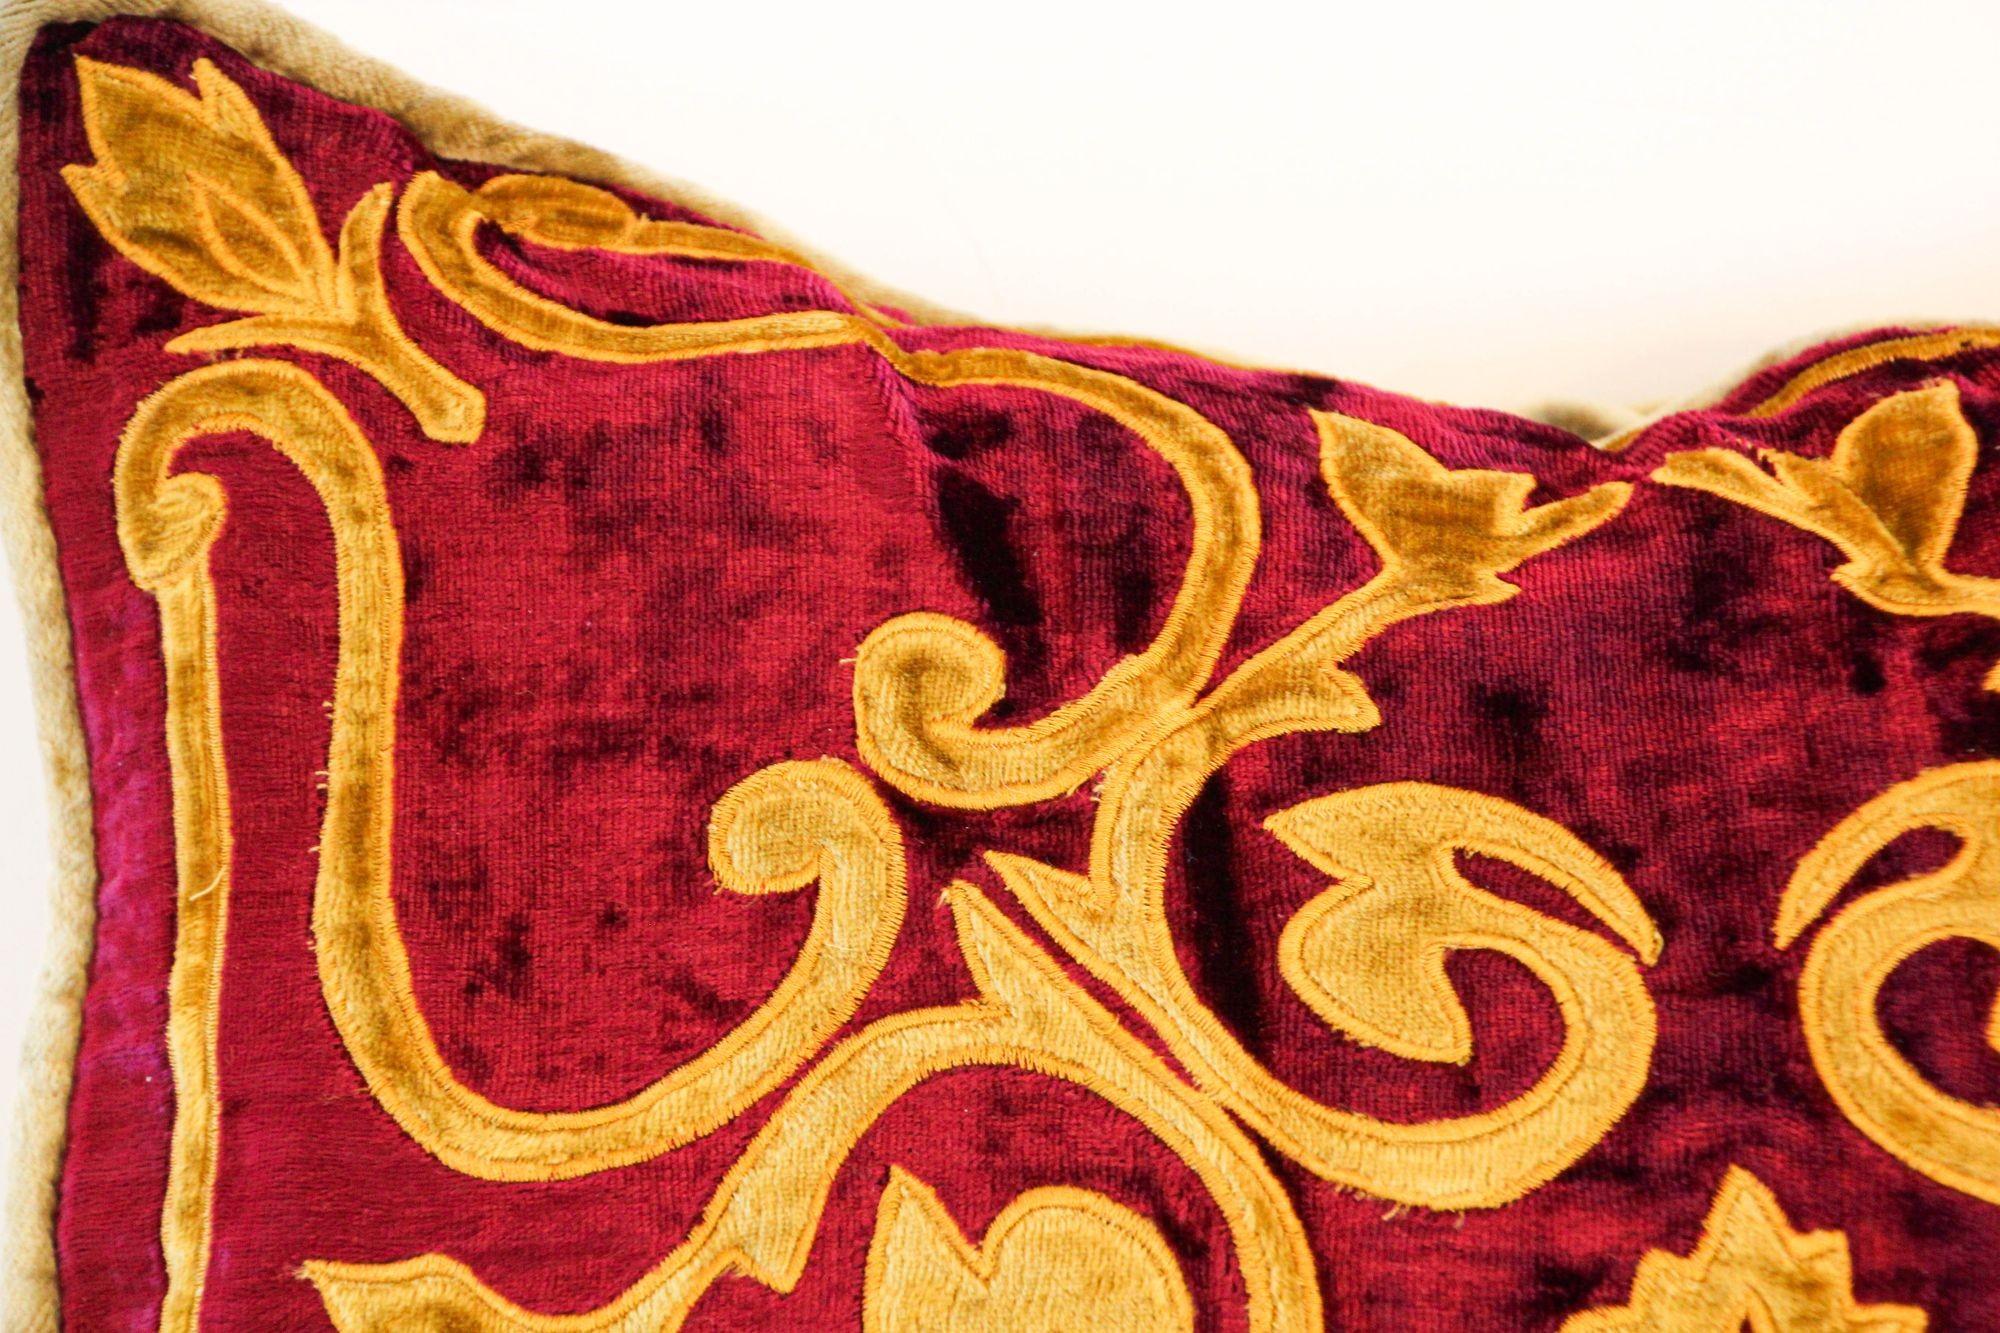 Italian Venetian Baroque Red and Gold Velvet Pillows with Elaborate Applique Work a Pair For Sale